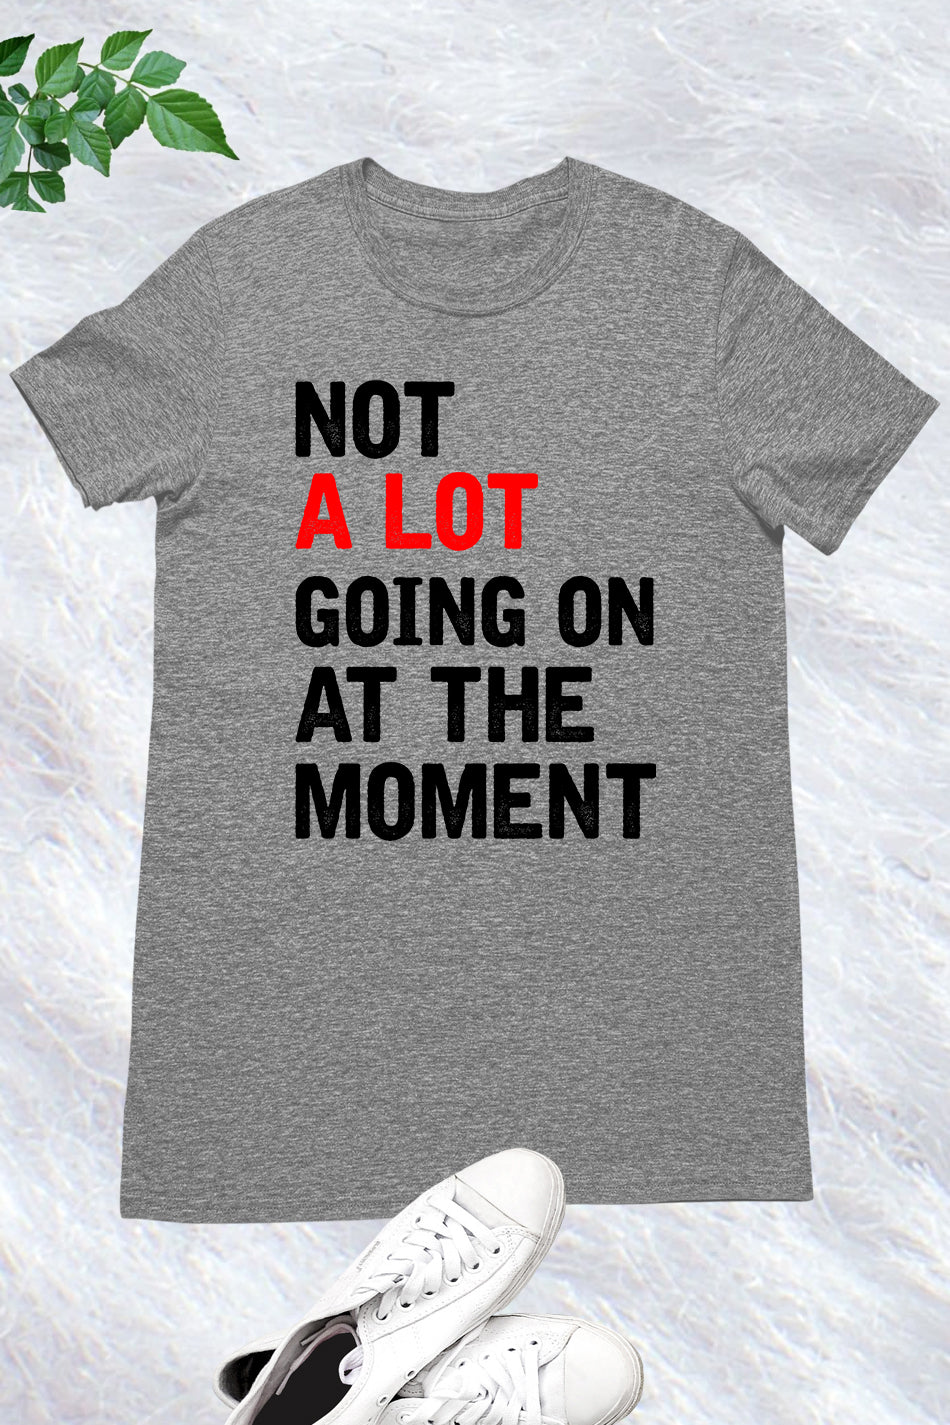 Not A Lot Going On at The Moment Trendy T Shirt